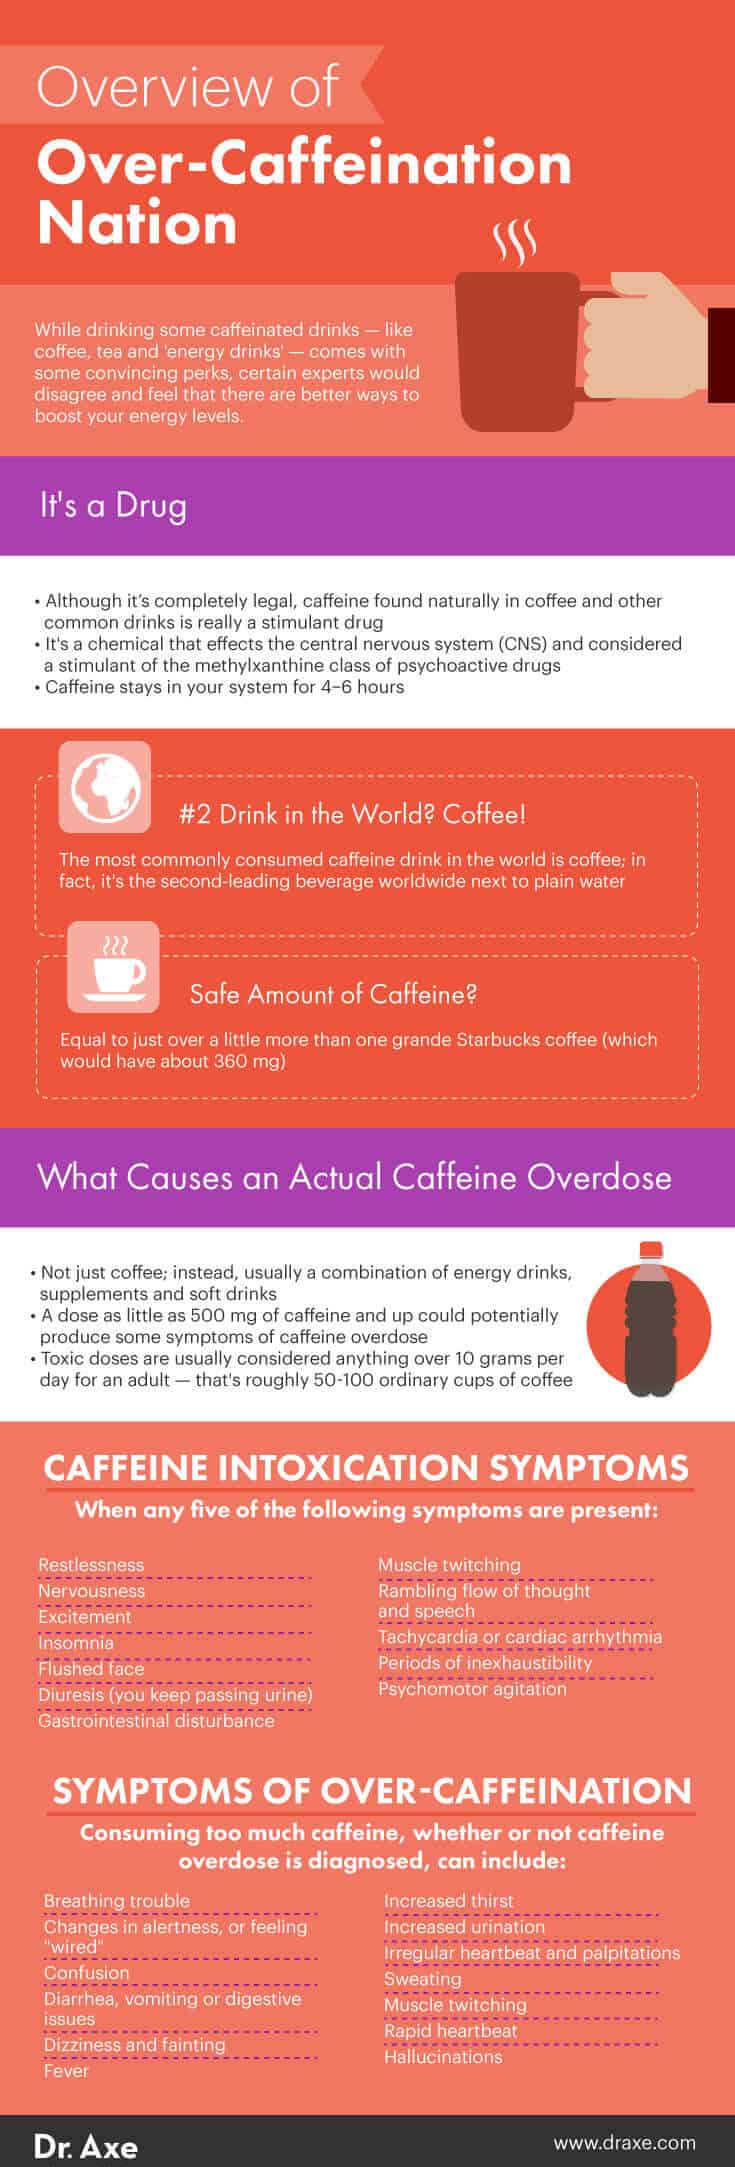 Does Eating Help Caffeine Overdose?